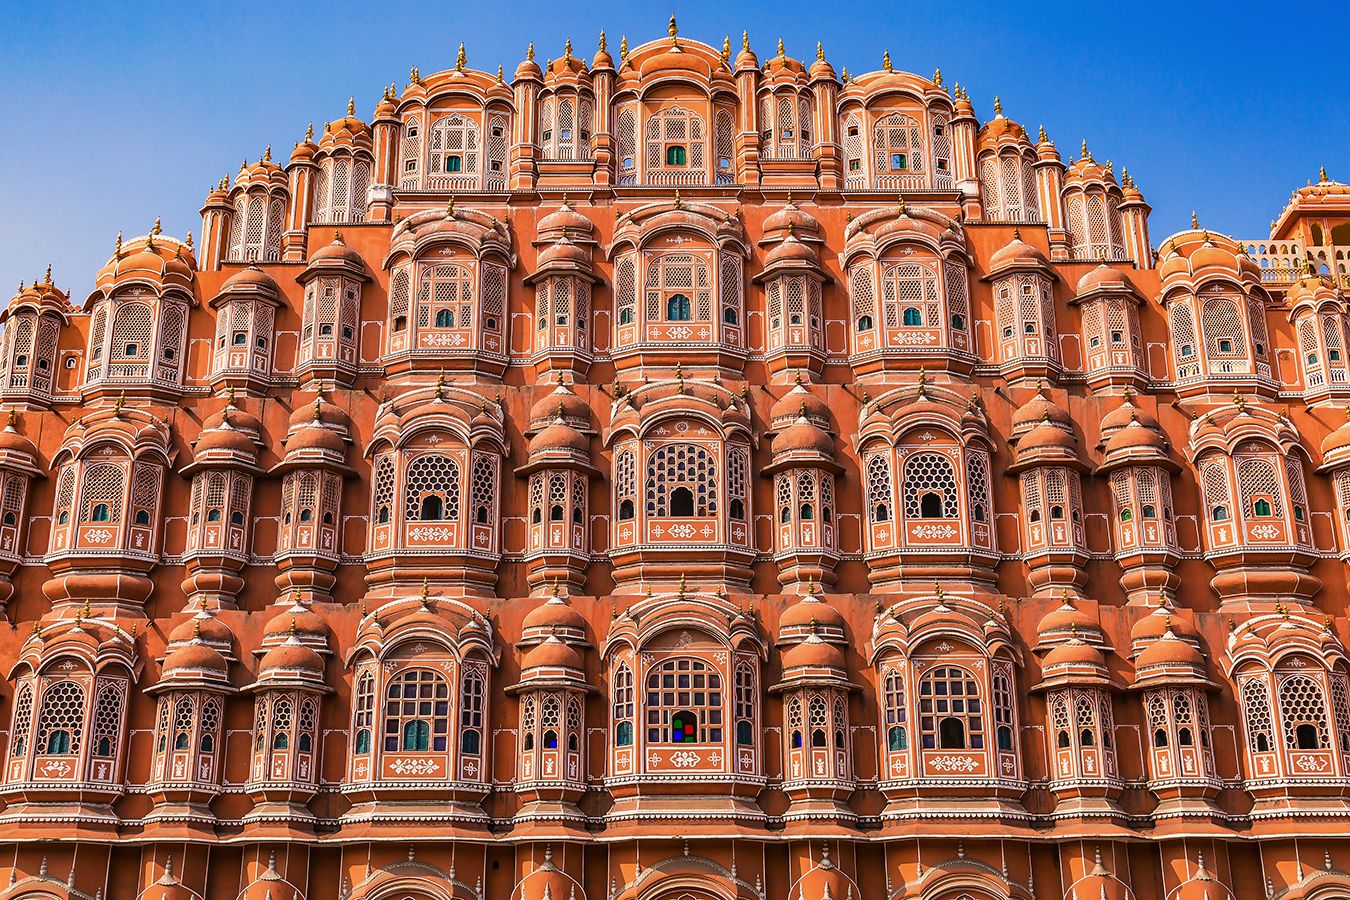 Hawa Mahal: How India's 'palace of winds' was ahead of its time | CNN